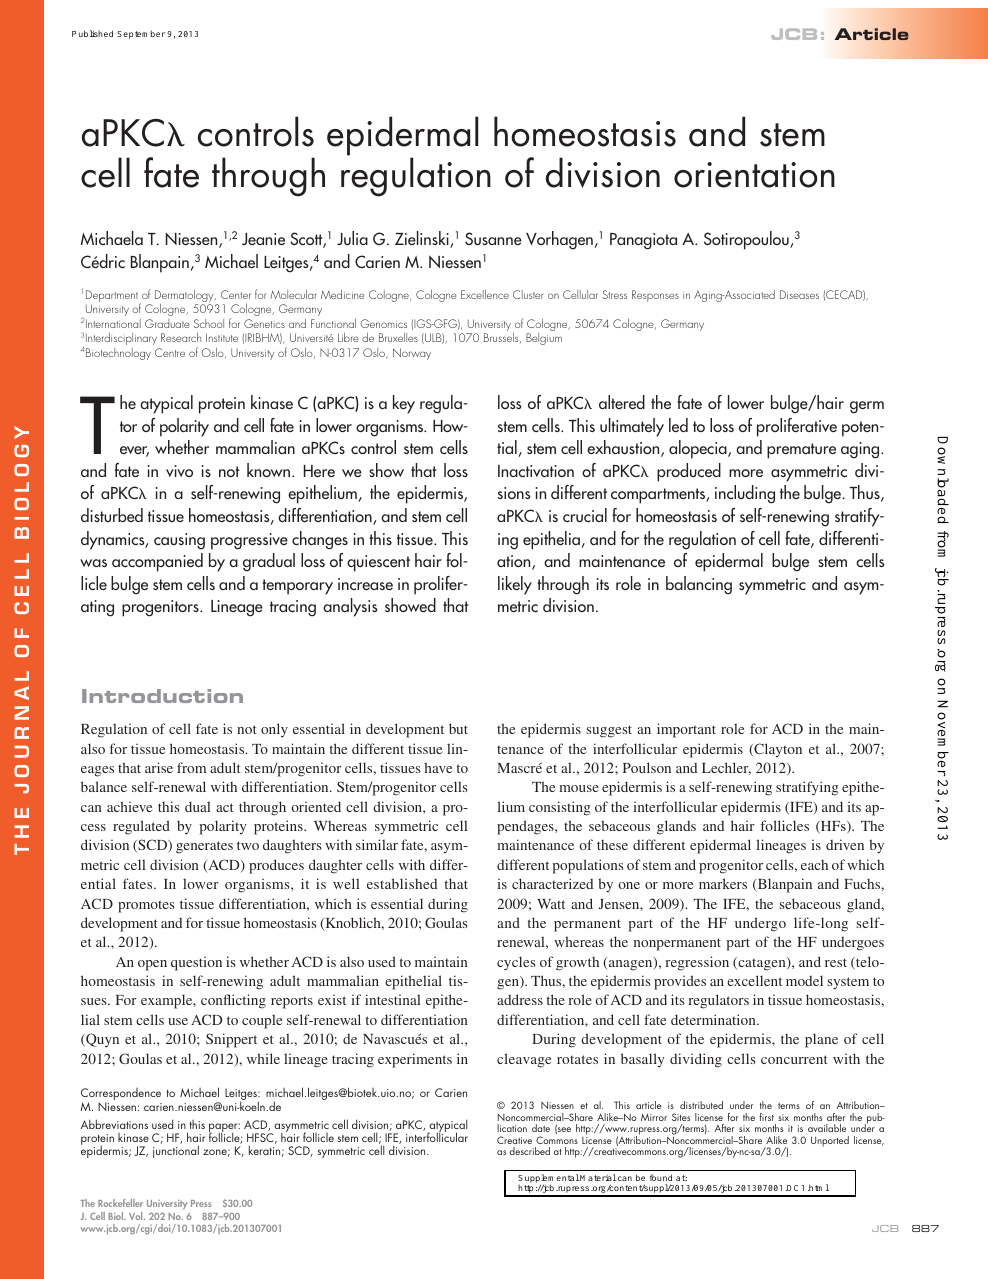 Apkc Controls Epidermal Homeostasis And Stem Cell Fate Through Regulation Of Division Orientation Topic Of Research Paper In Biological Sciences Download Scholarly Article Pdf And Read For Free On Cyberleninka Open